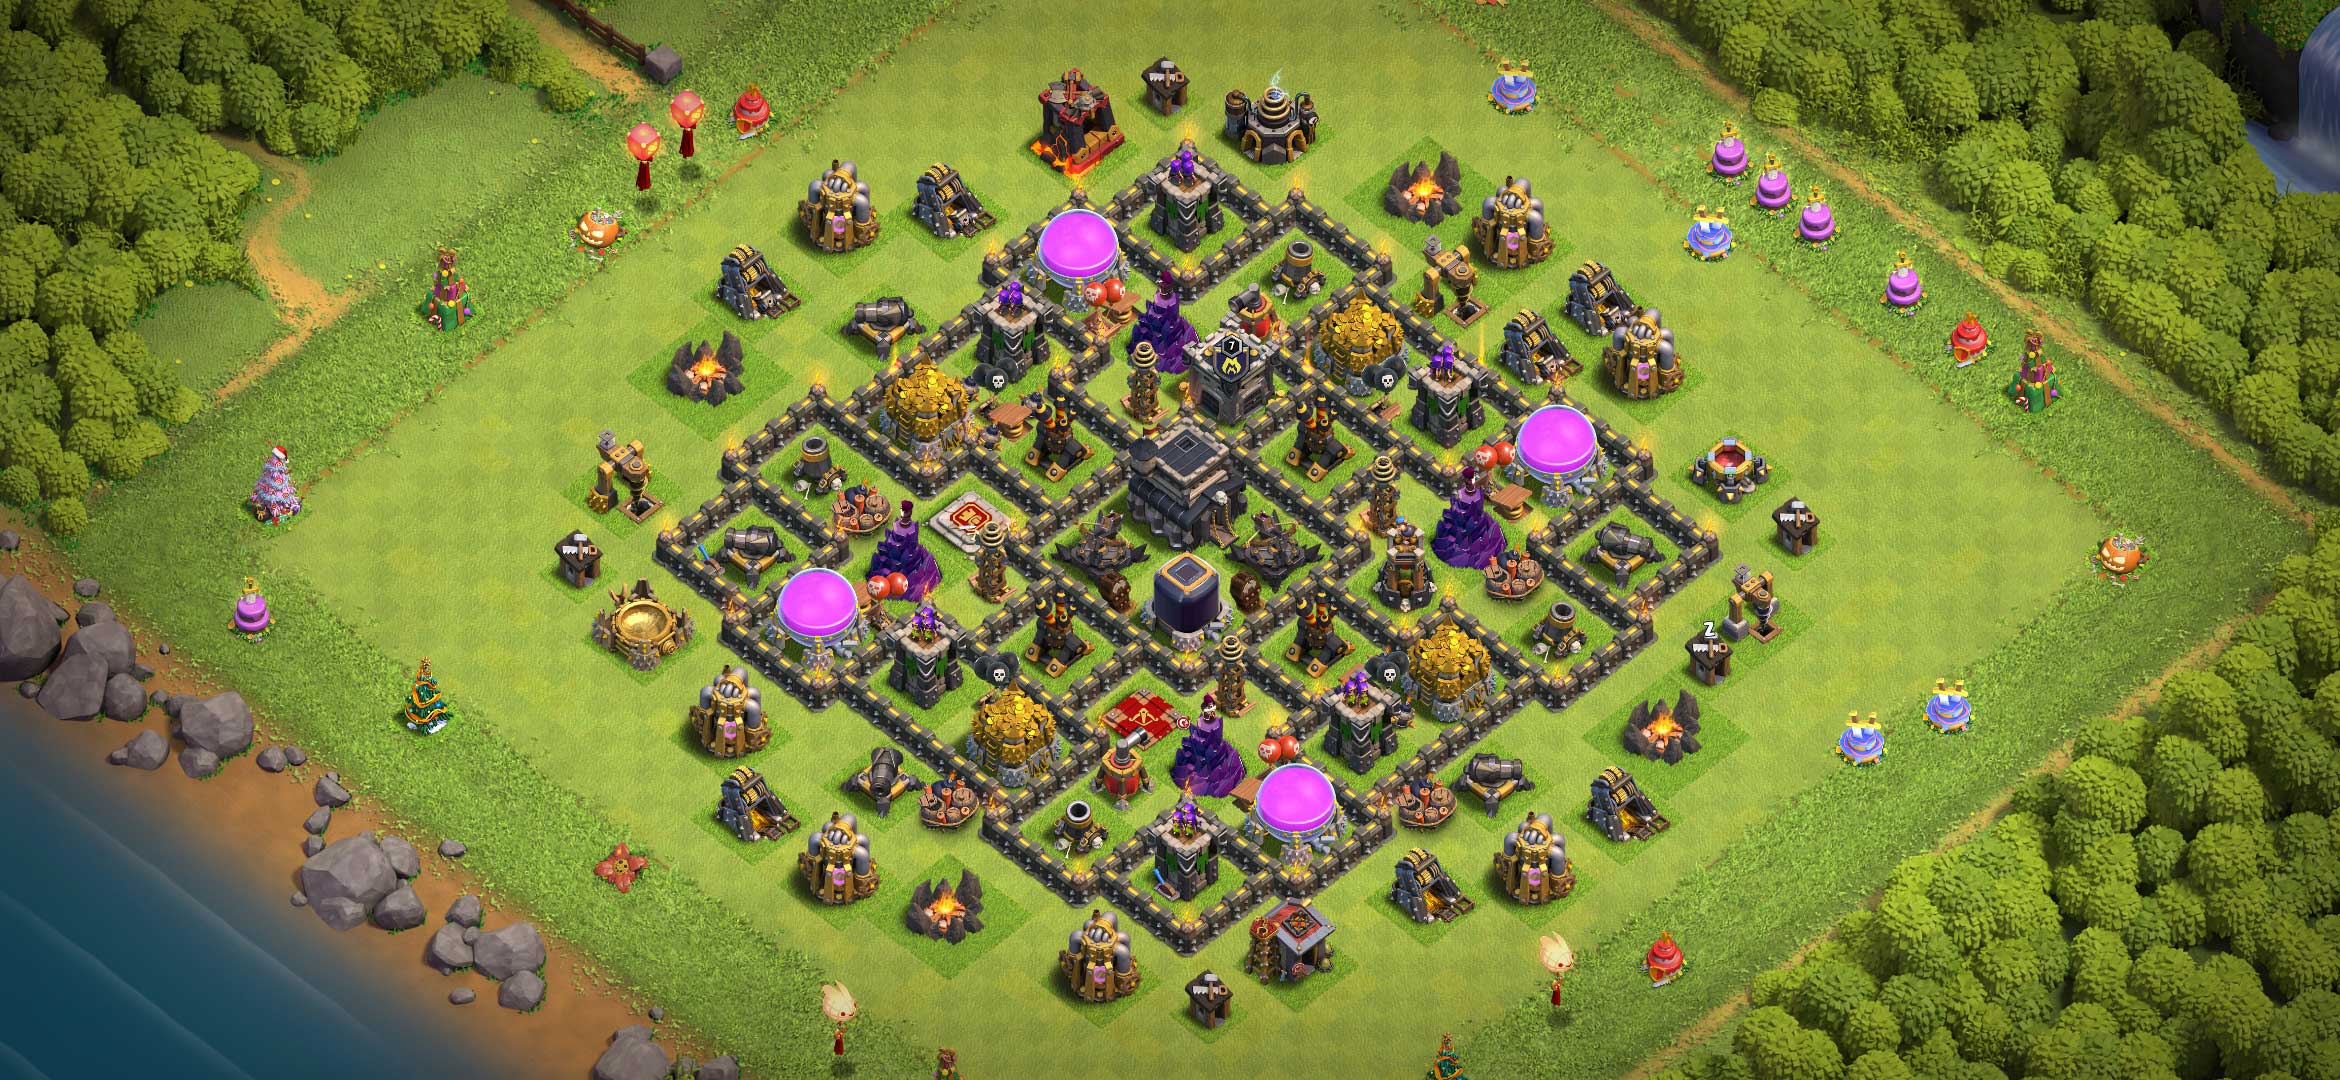 New TH9 Home Base